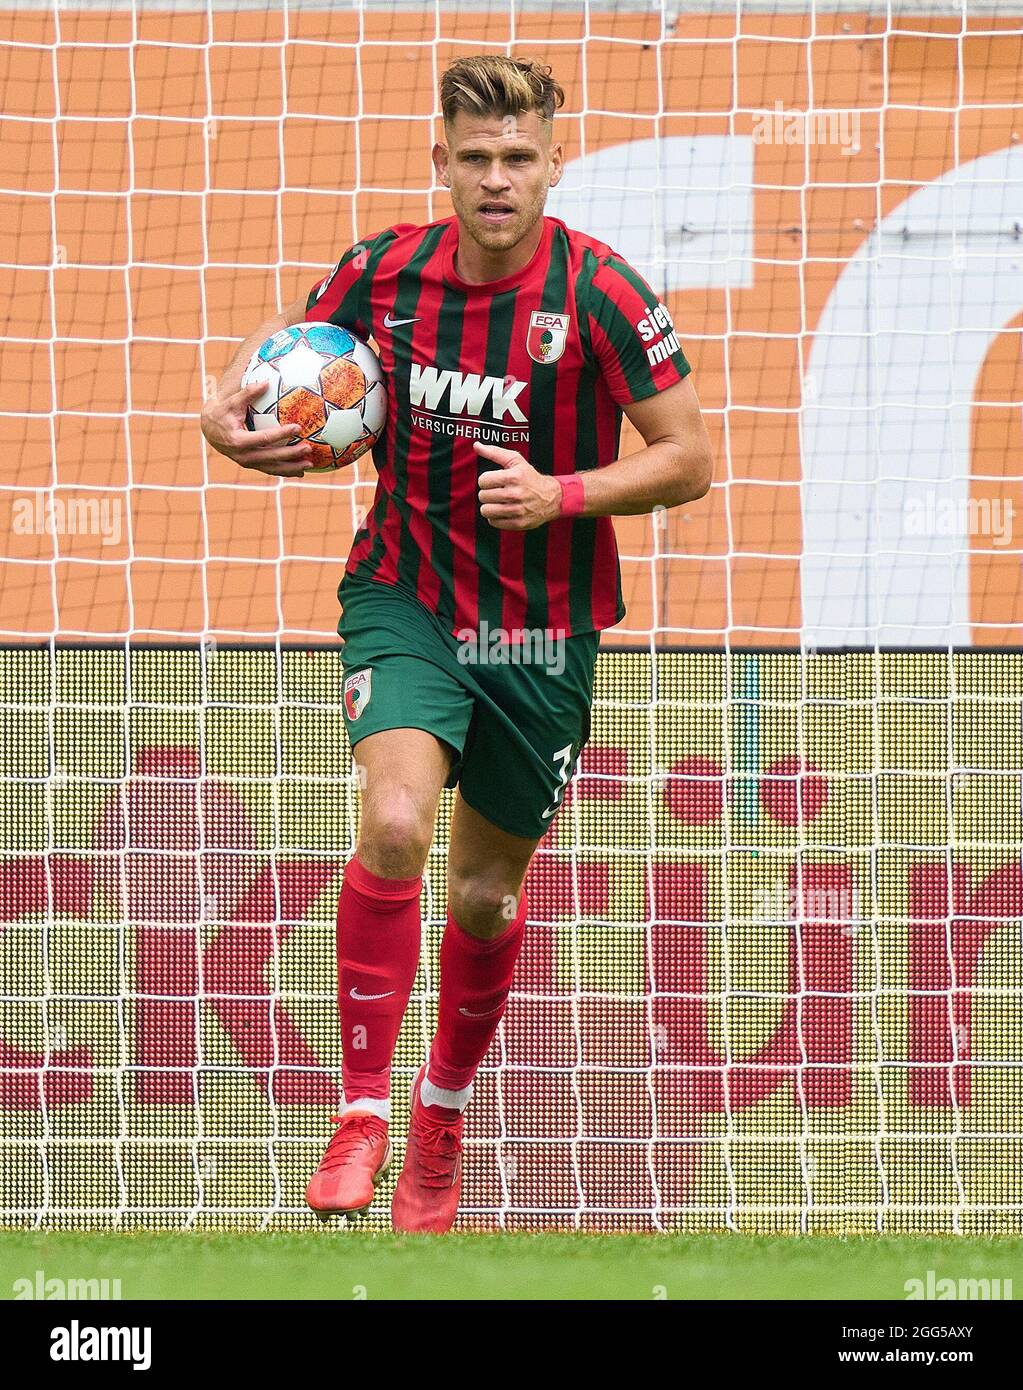 Florian NIEDERLECHNER, FCA 7  in the match FC AUGSBURG - BAYER 04 LEVERKUSEN 1-4 1.German Football League on August 28, 2021 in Augsburg, Germany  Season 2021/2022, matchday 3, 1.Bundesliga, 3.Spieltag. © Peter Schatz / Alamy Live News    - DFL REGULATIONS PROHIBIT ANY USE OF PHOTOGRAPHS as IMAGE SEQUENCES and/or QUASI-VIDEO - Stock Photo